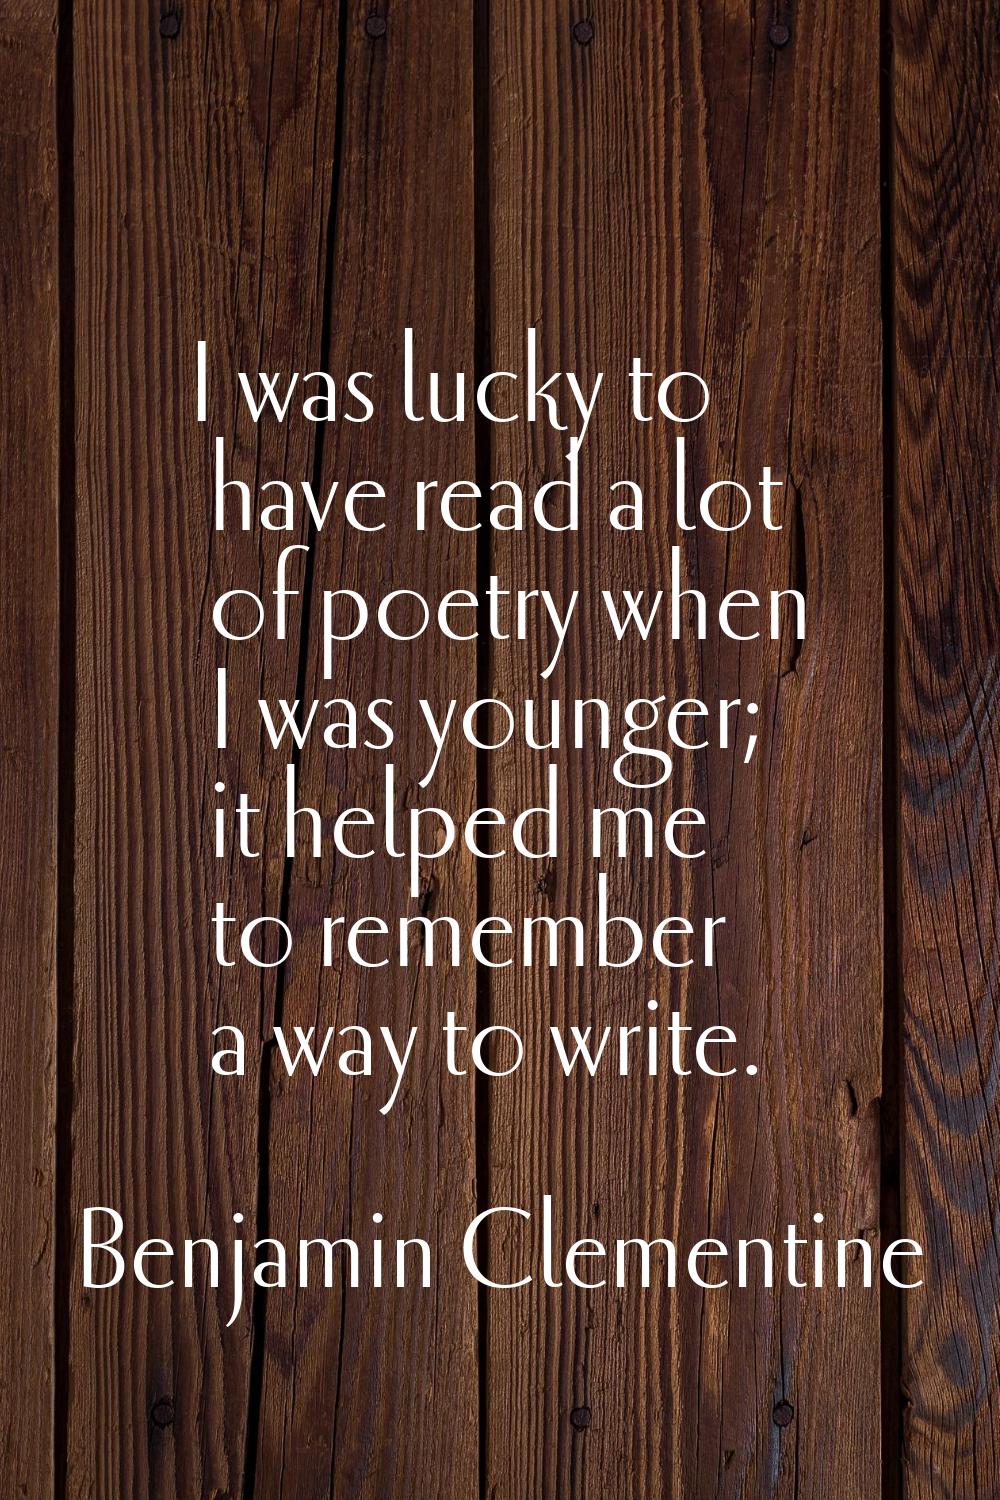 I was lucky to have read a lot of poetry when I was younger; it helped me to remember a way to writ